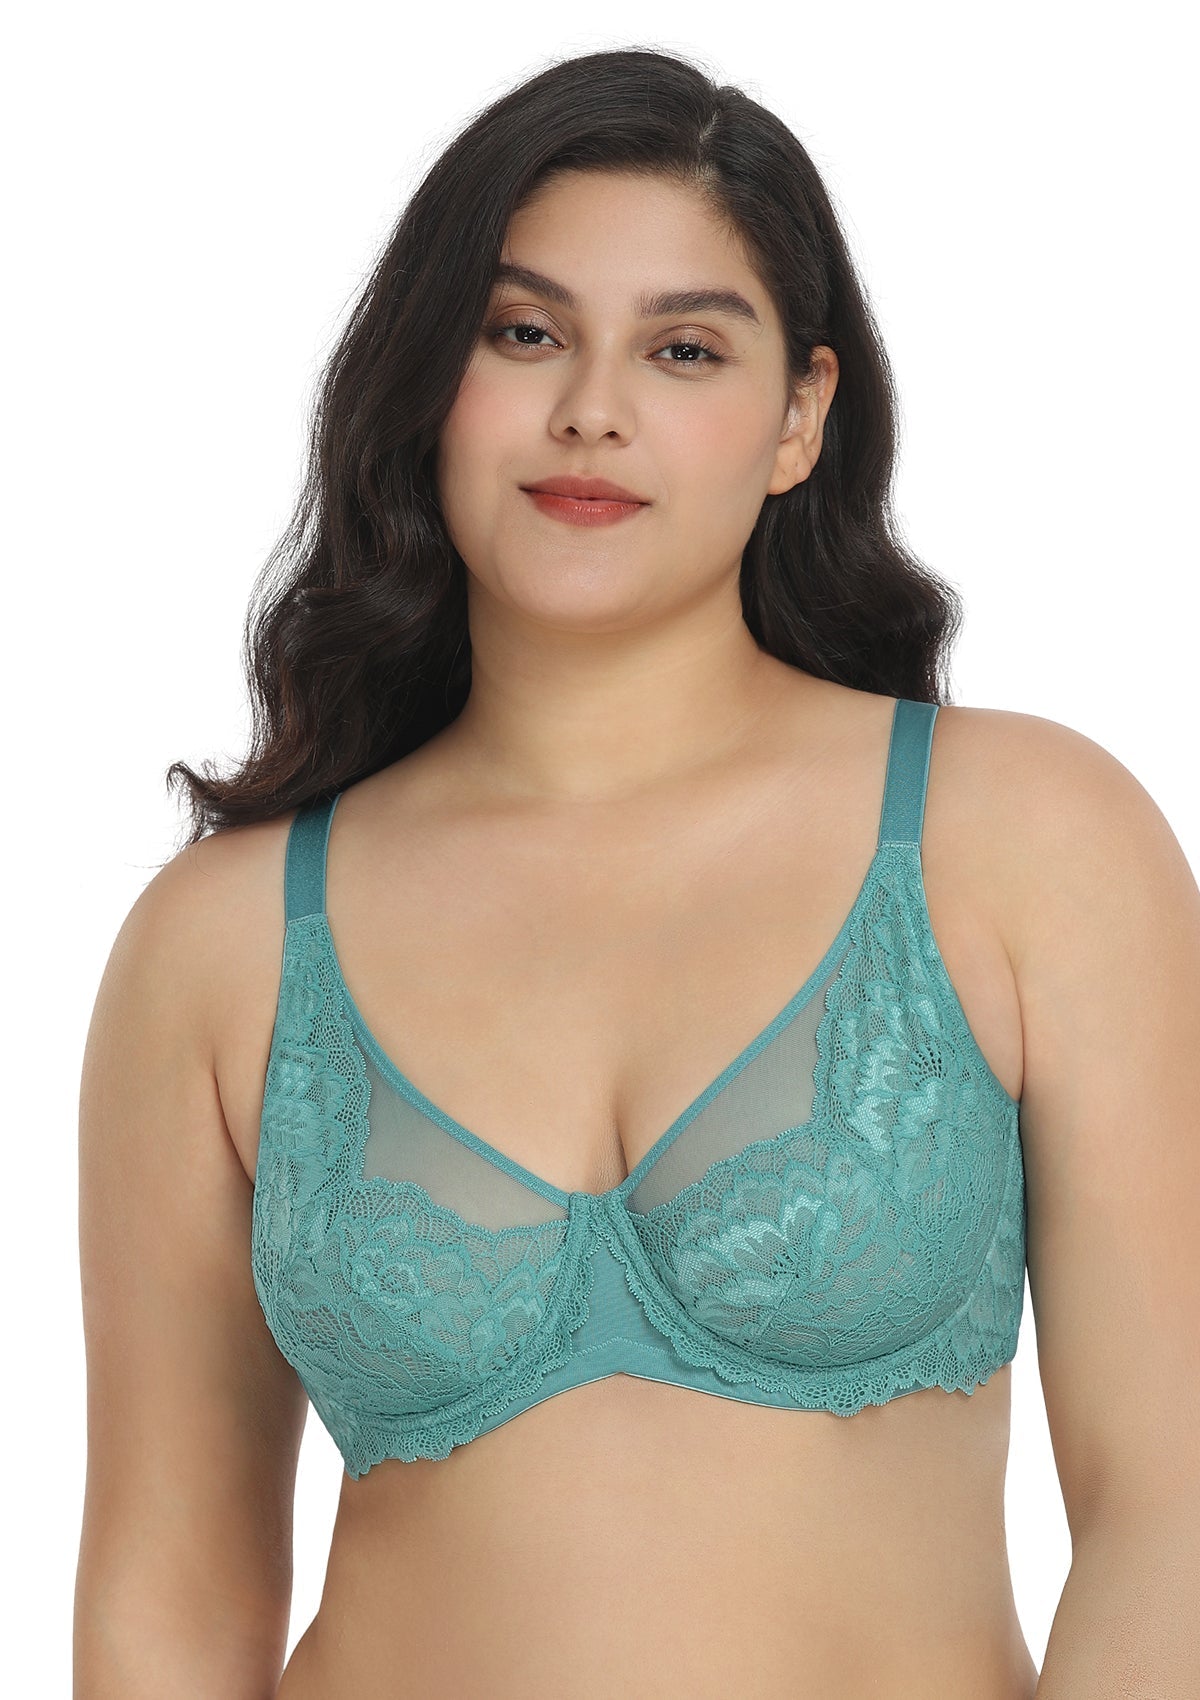 HSIA Paeonia Lace Full Coverage Underwire Non-Padded Uplifting Bra - Light Coral / 38 / D